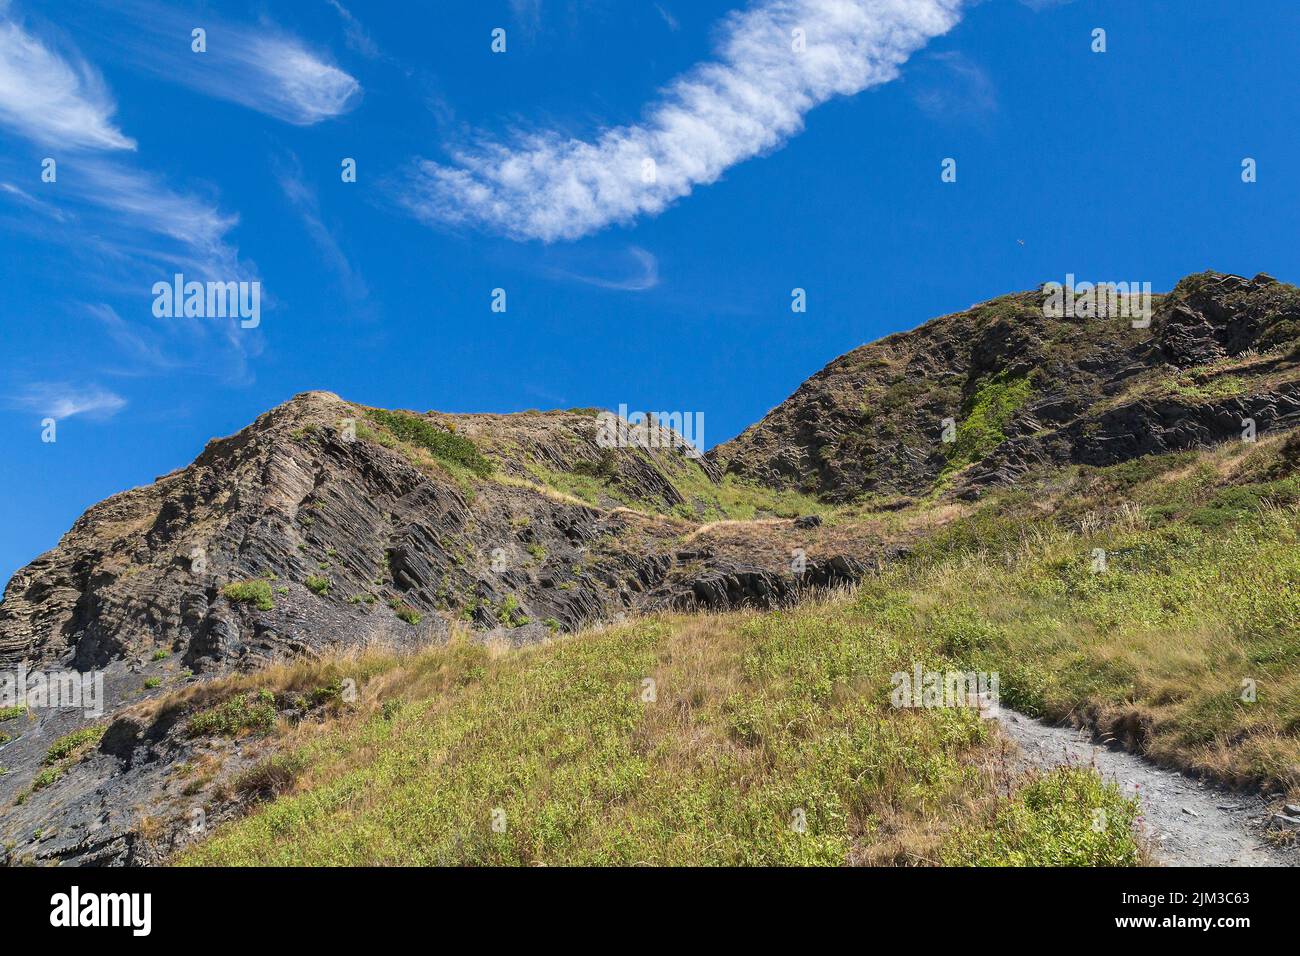 Scenic landscape of a steep hill trail featuring rocks set against a blue sky. Health, fitness, walking, hiking or active leisure time concept. Stock Photo